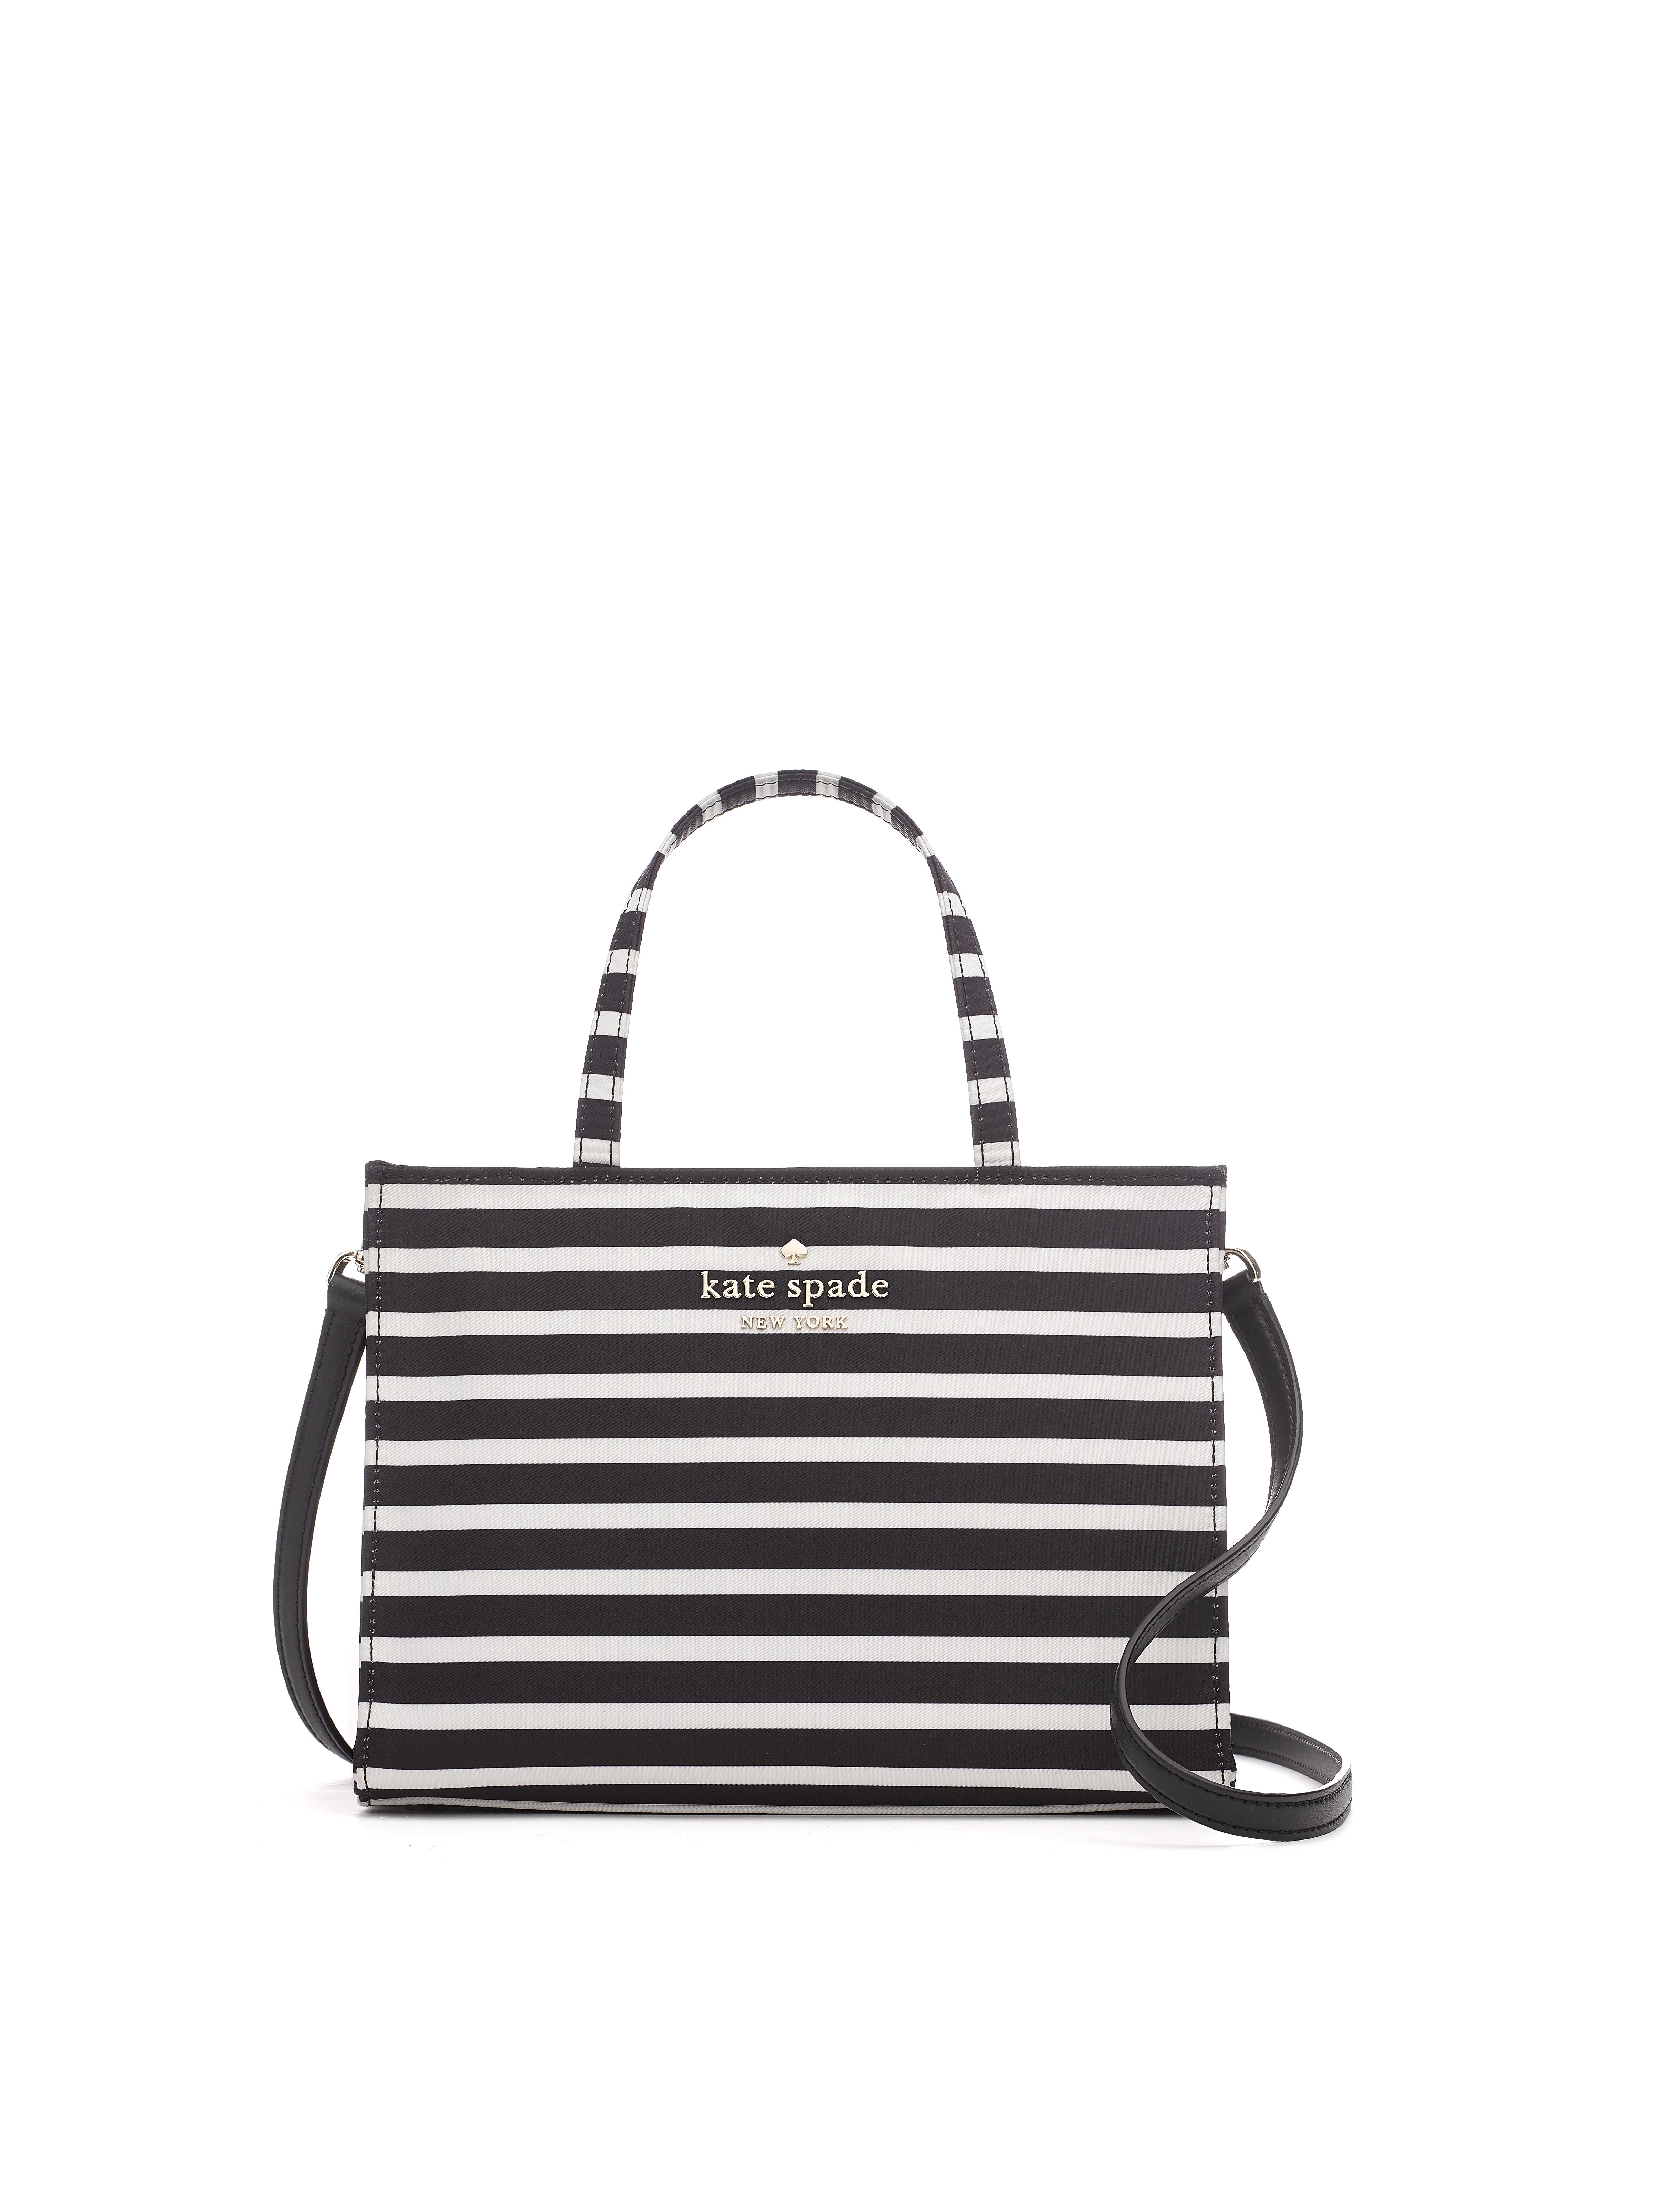 Kate spade bag authentic | Shopee Philippines